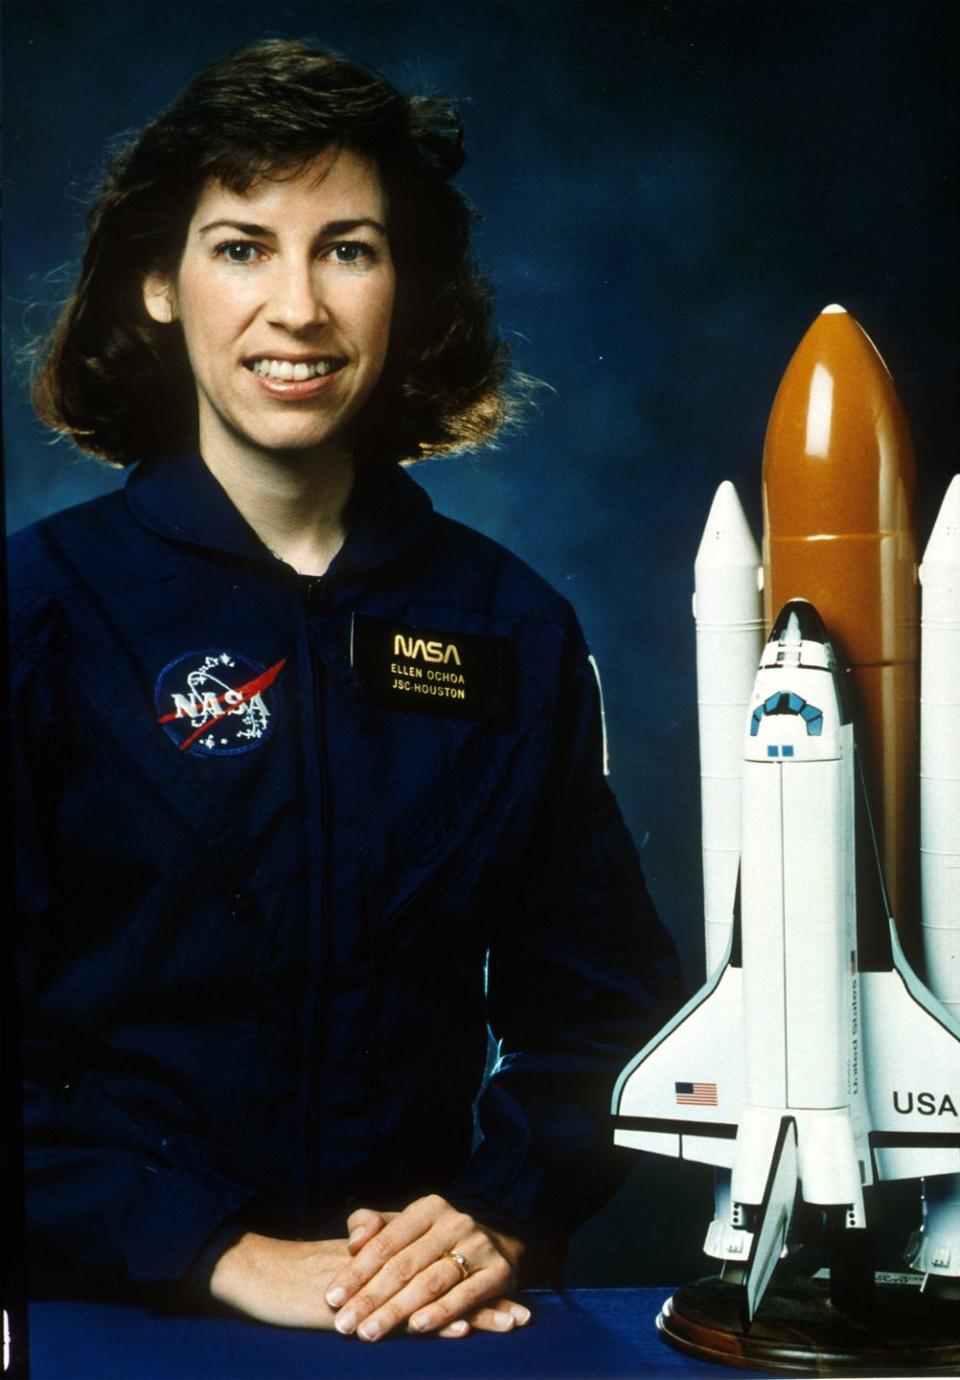 <p>Ellen Ochoa is a Mexican-American engineer and former astronaut, known best for being the first Hispanic woman to go into space when she served on a nine-day mission aboard the Space Shuttle Discovery. She also served as Director of the NASA Johnson Space Center, becoming the first Hispanic and second woman to do so.</p>